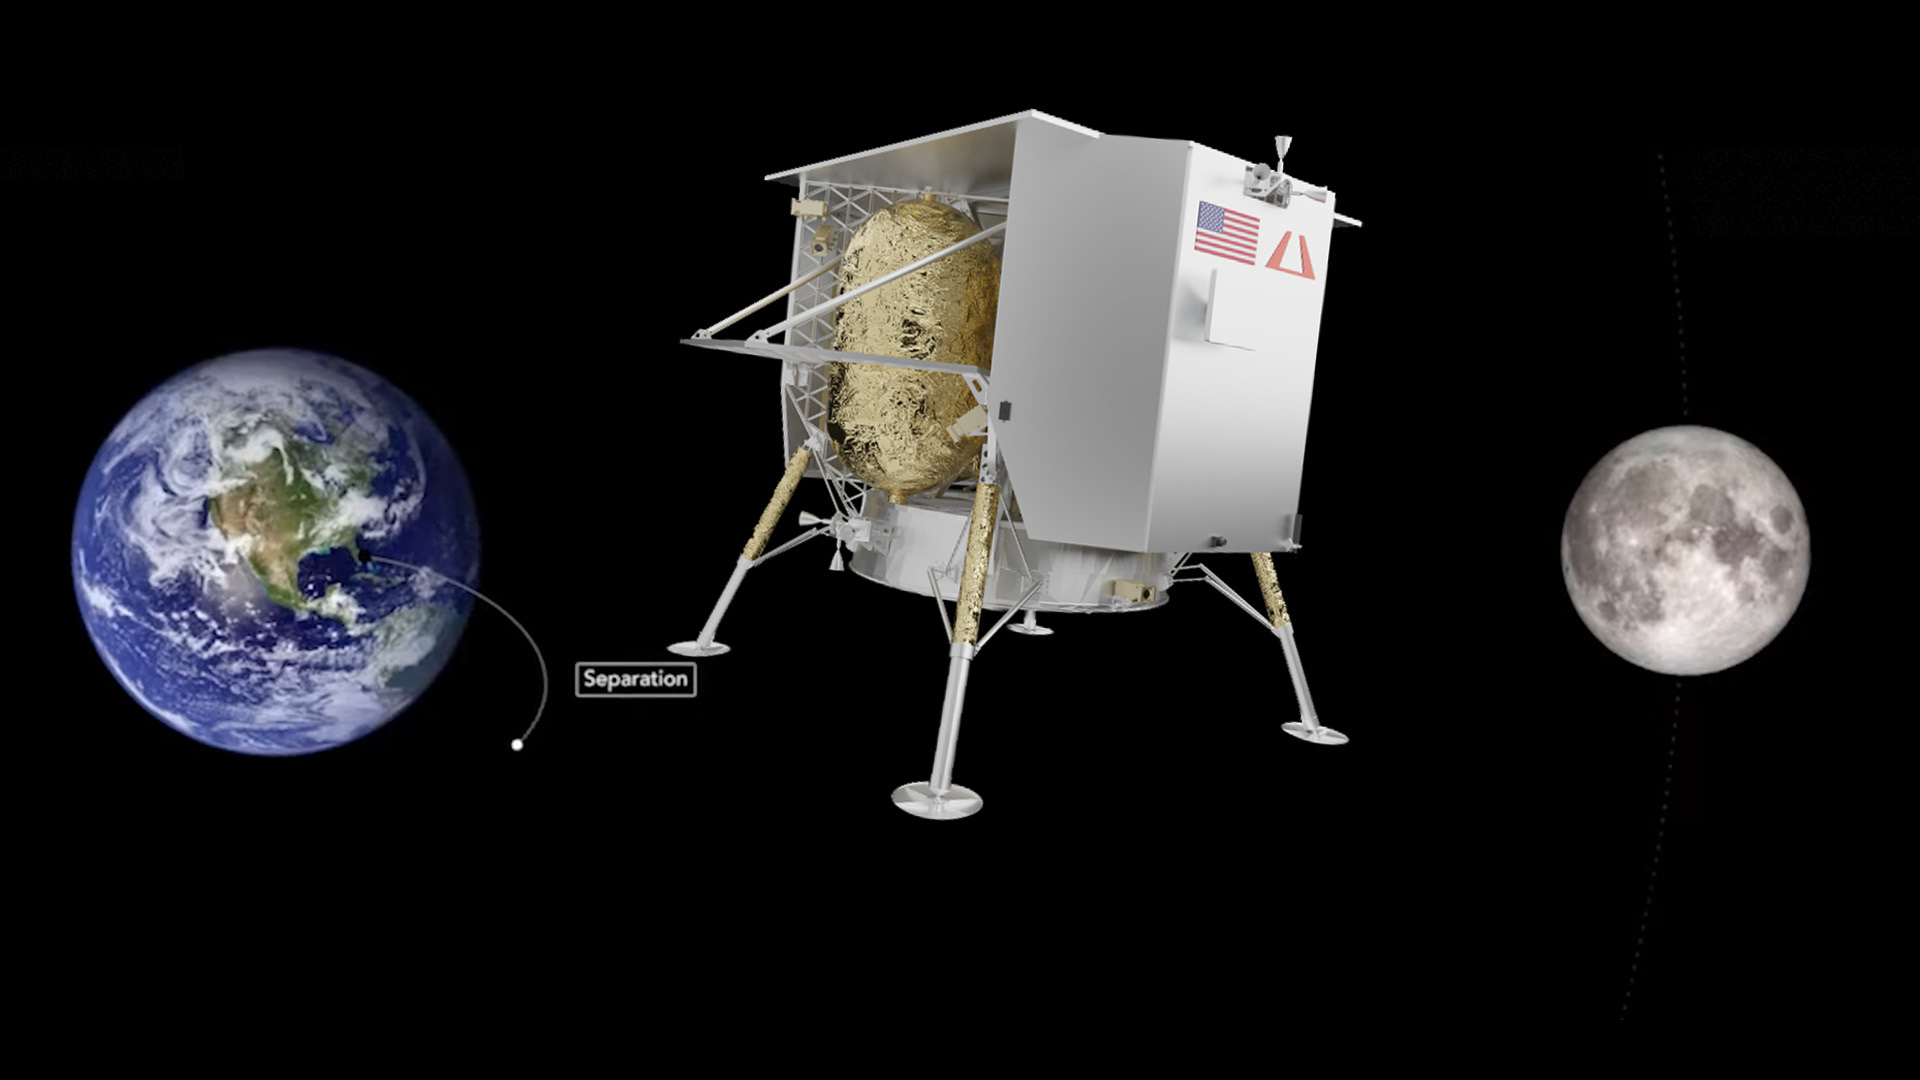 Private Peregrine moon lander may be dead, but Astrobotic still ‘excited for the next adventure’